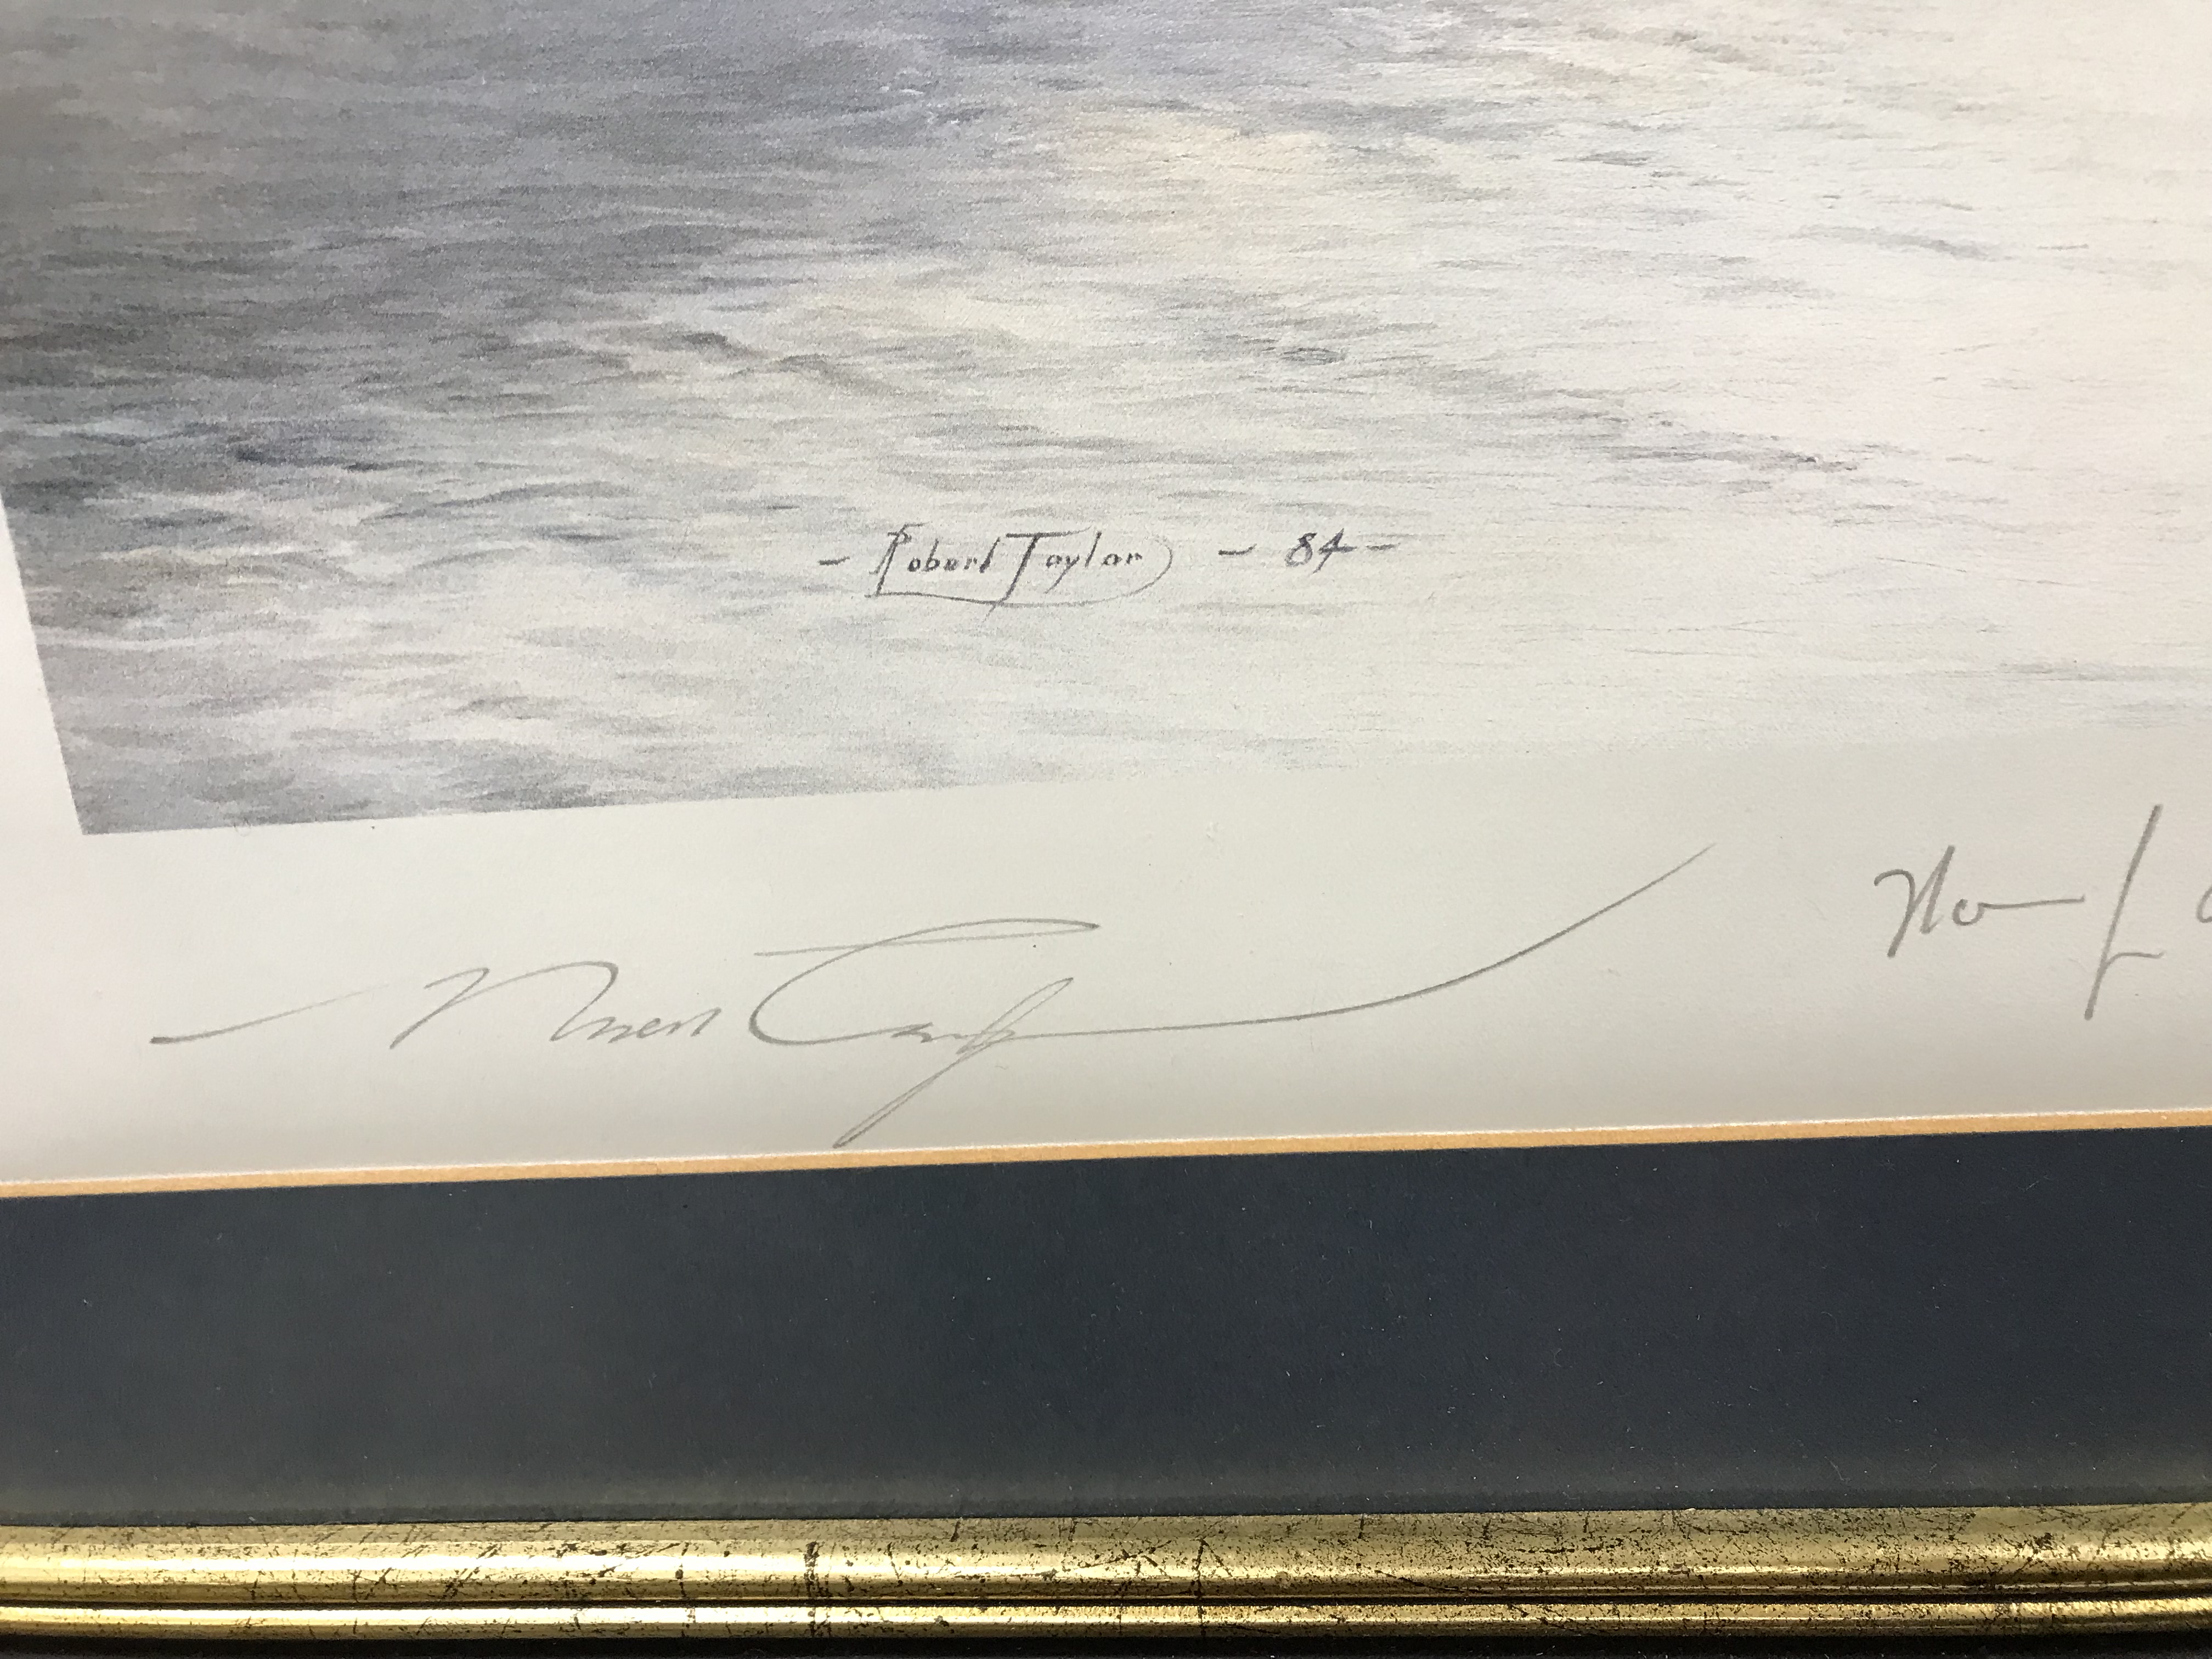 AFTER ROBERT TAYLOR "Memorial flight" colour print, signed by Robert Taylor, Johnnie Johnson CB, - Image 3 of 16